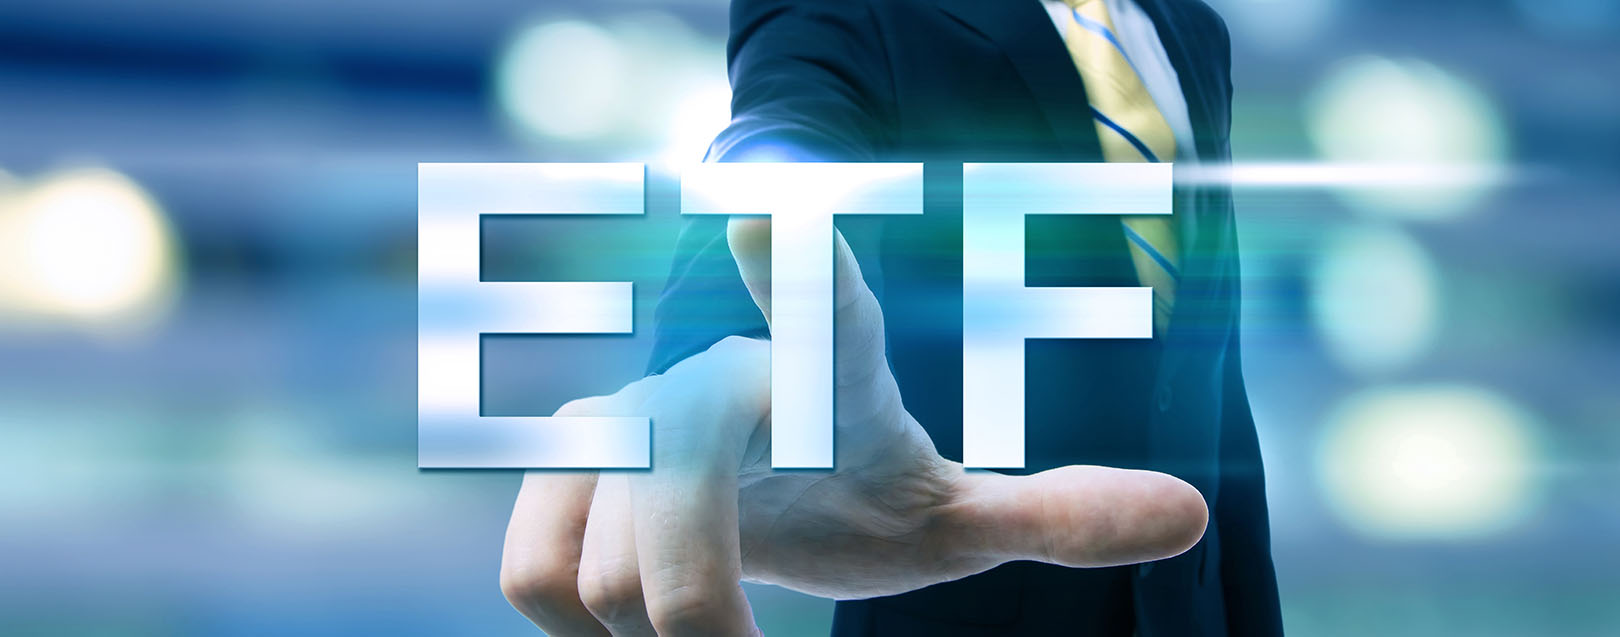 EPFO has invested Rs 9,723 cr in ETF's till Oct 31